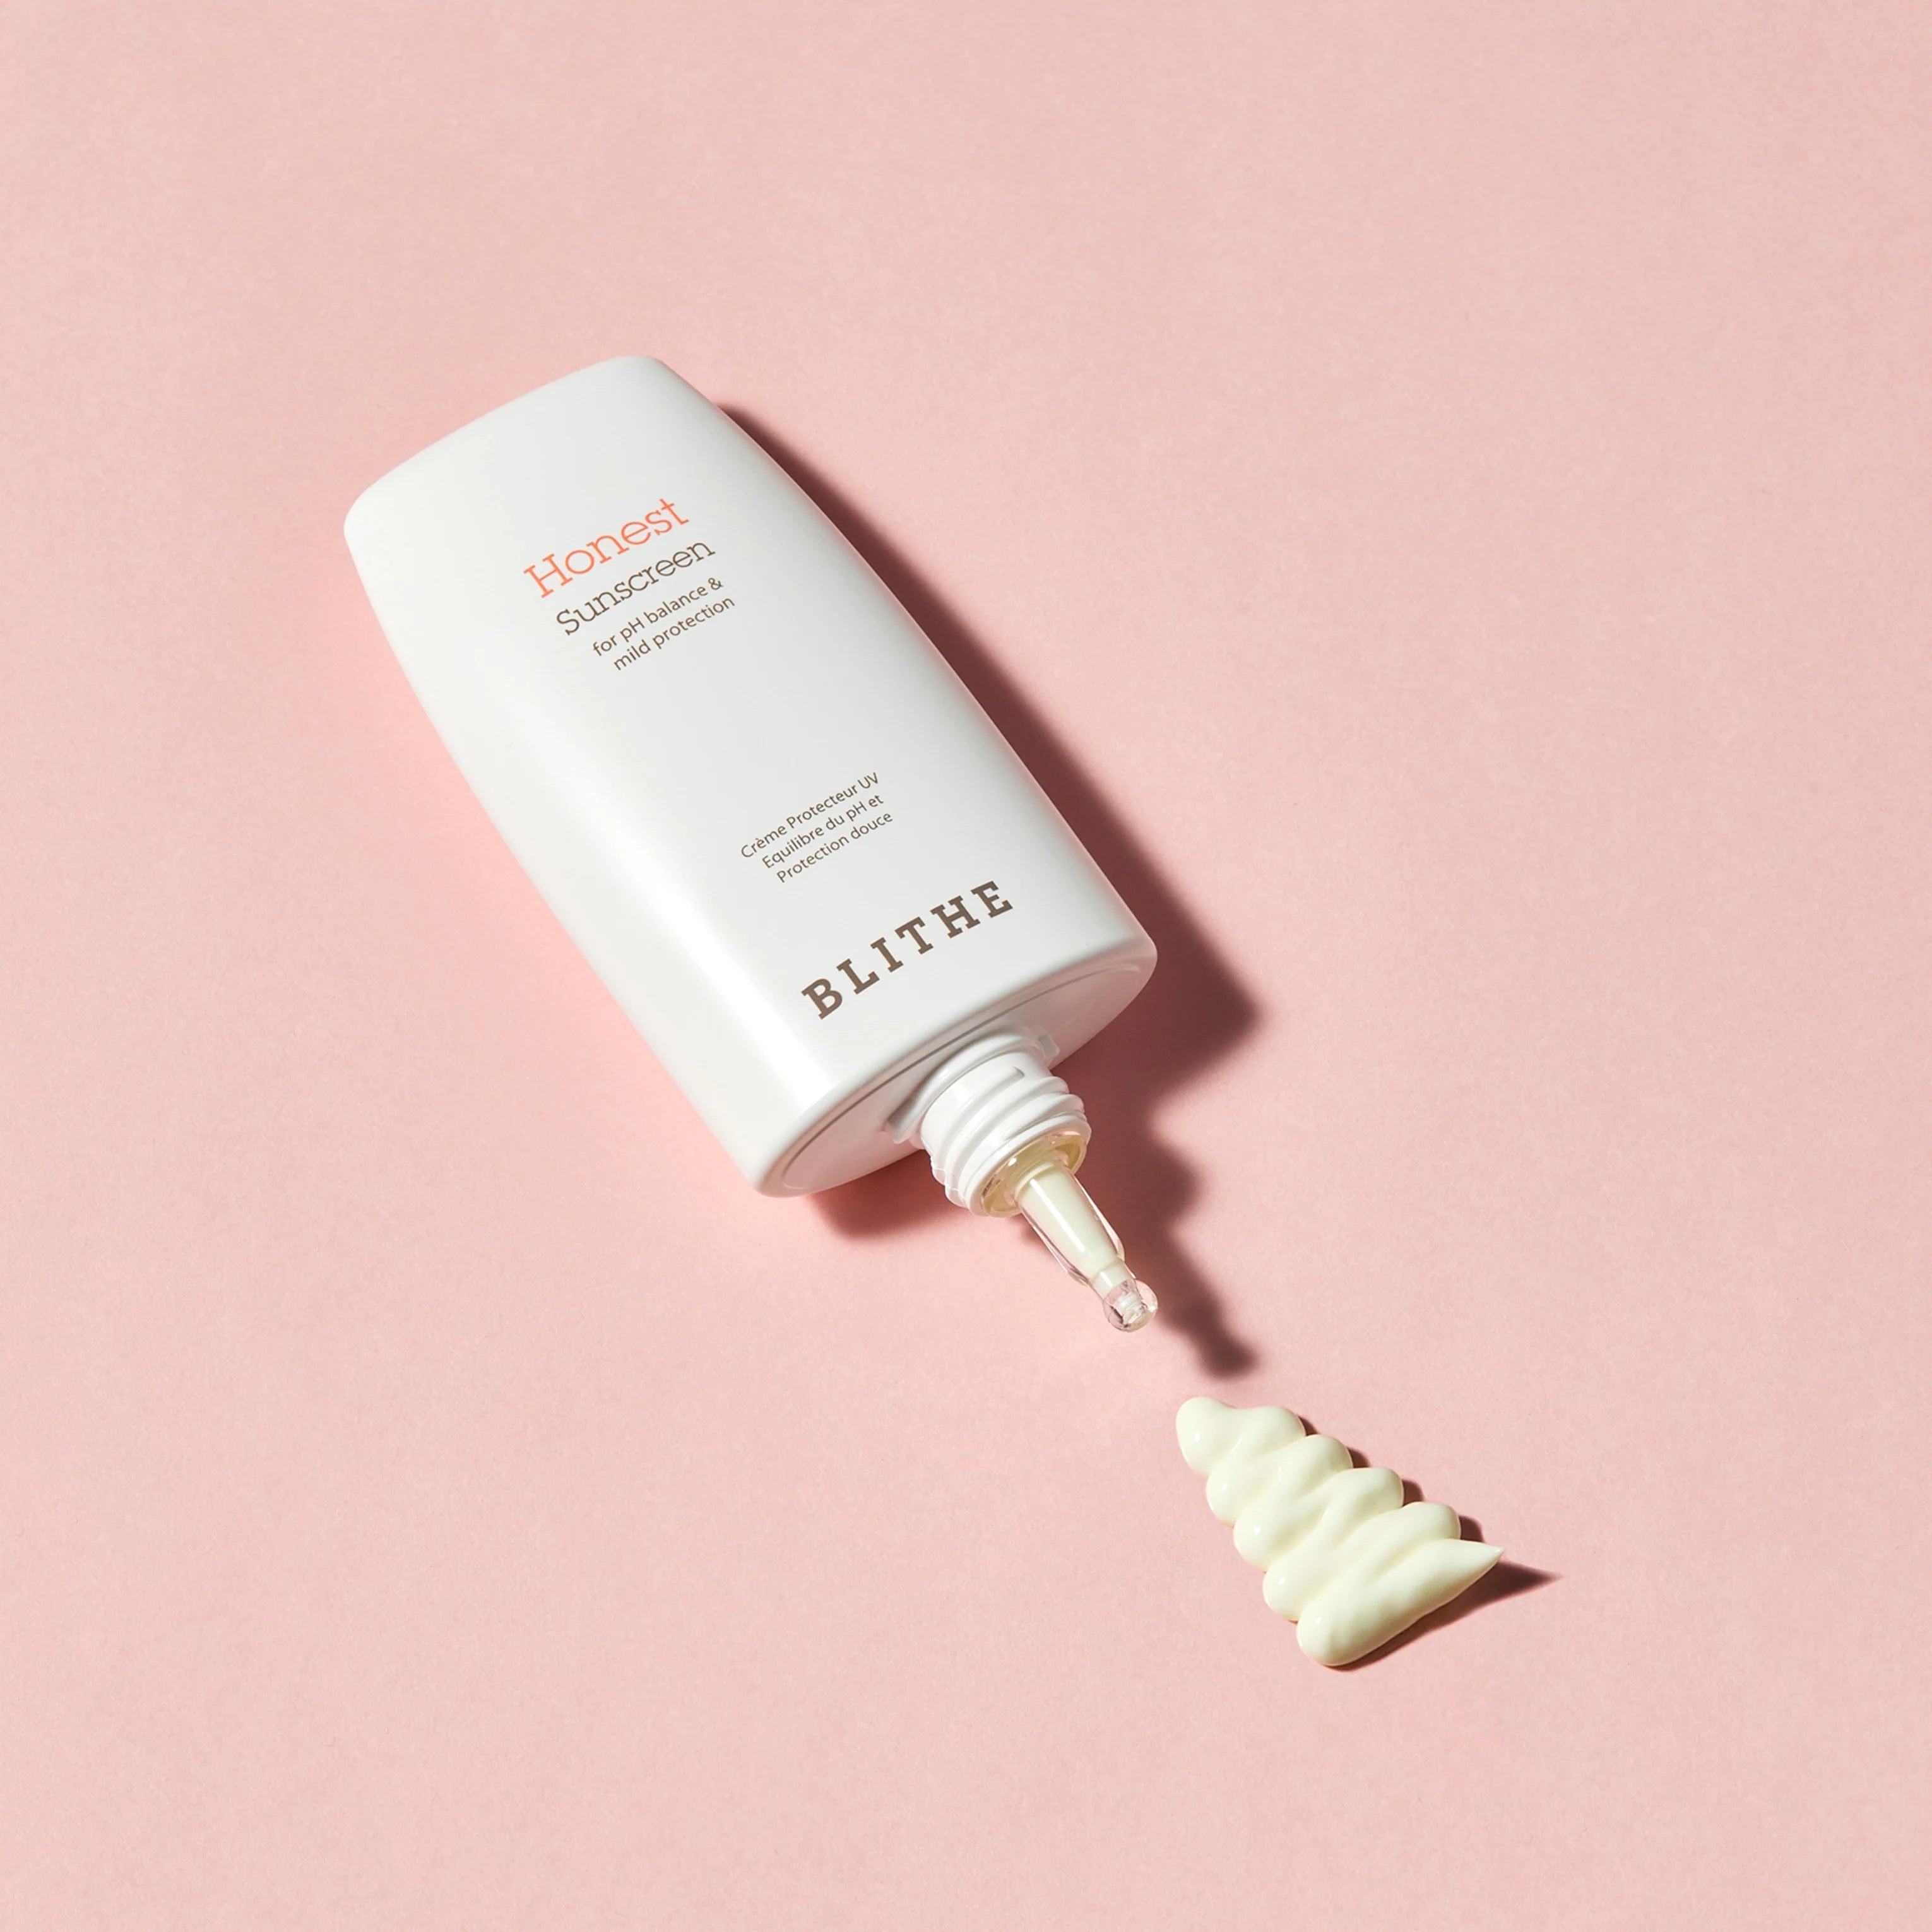 Blithe Cosmetics’ Honest Sunscreen on a pink background